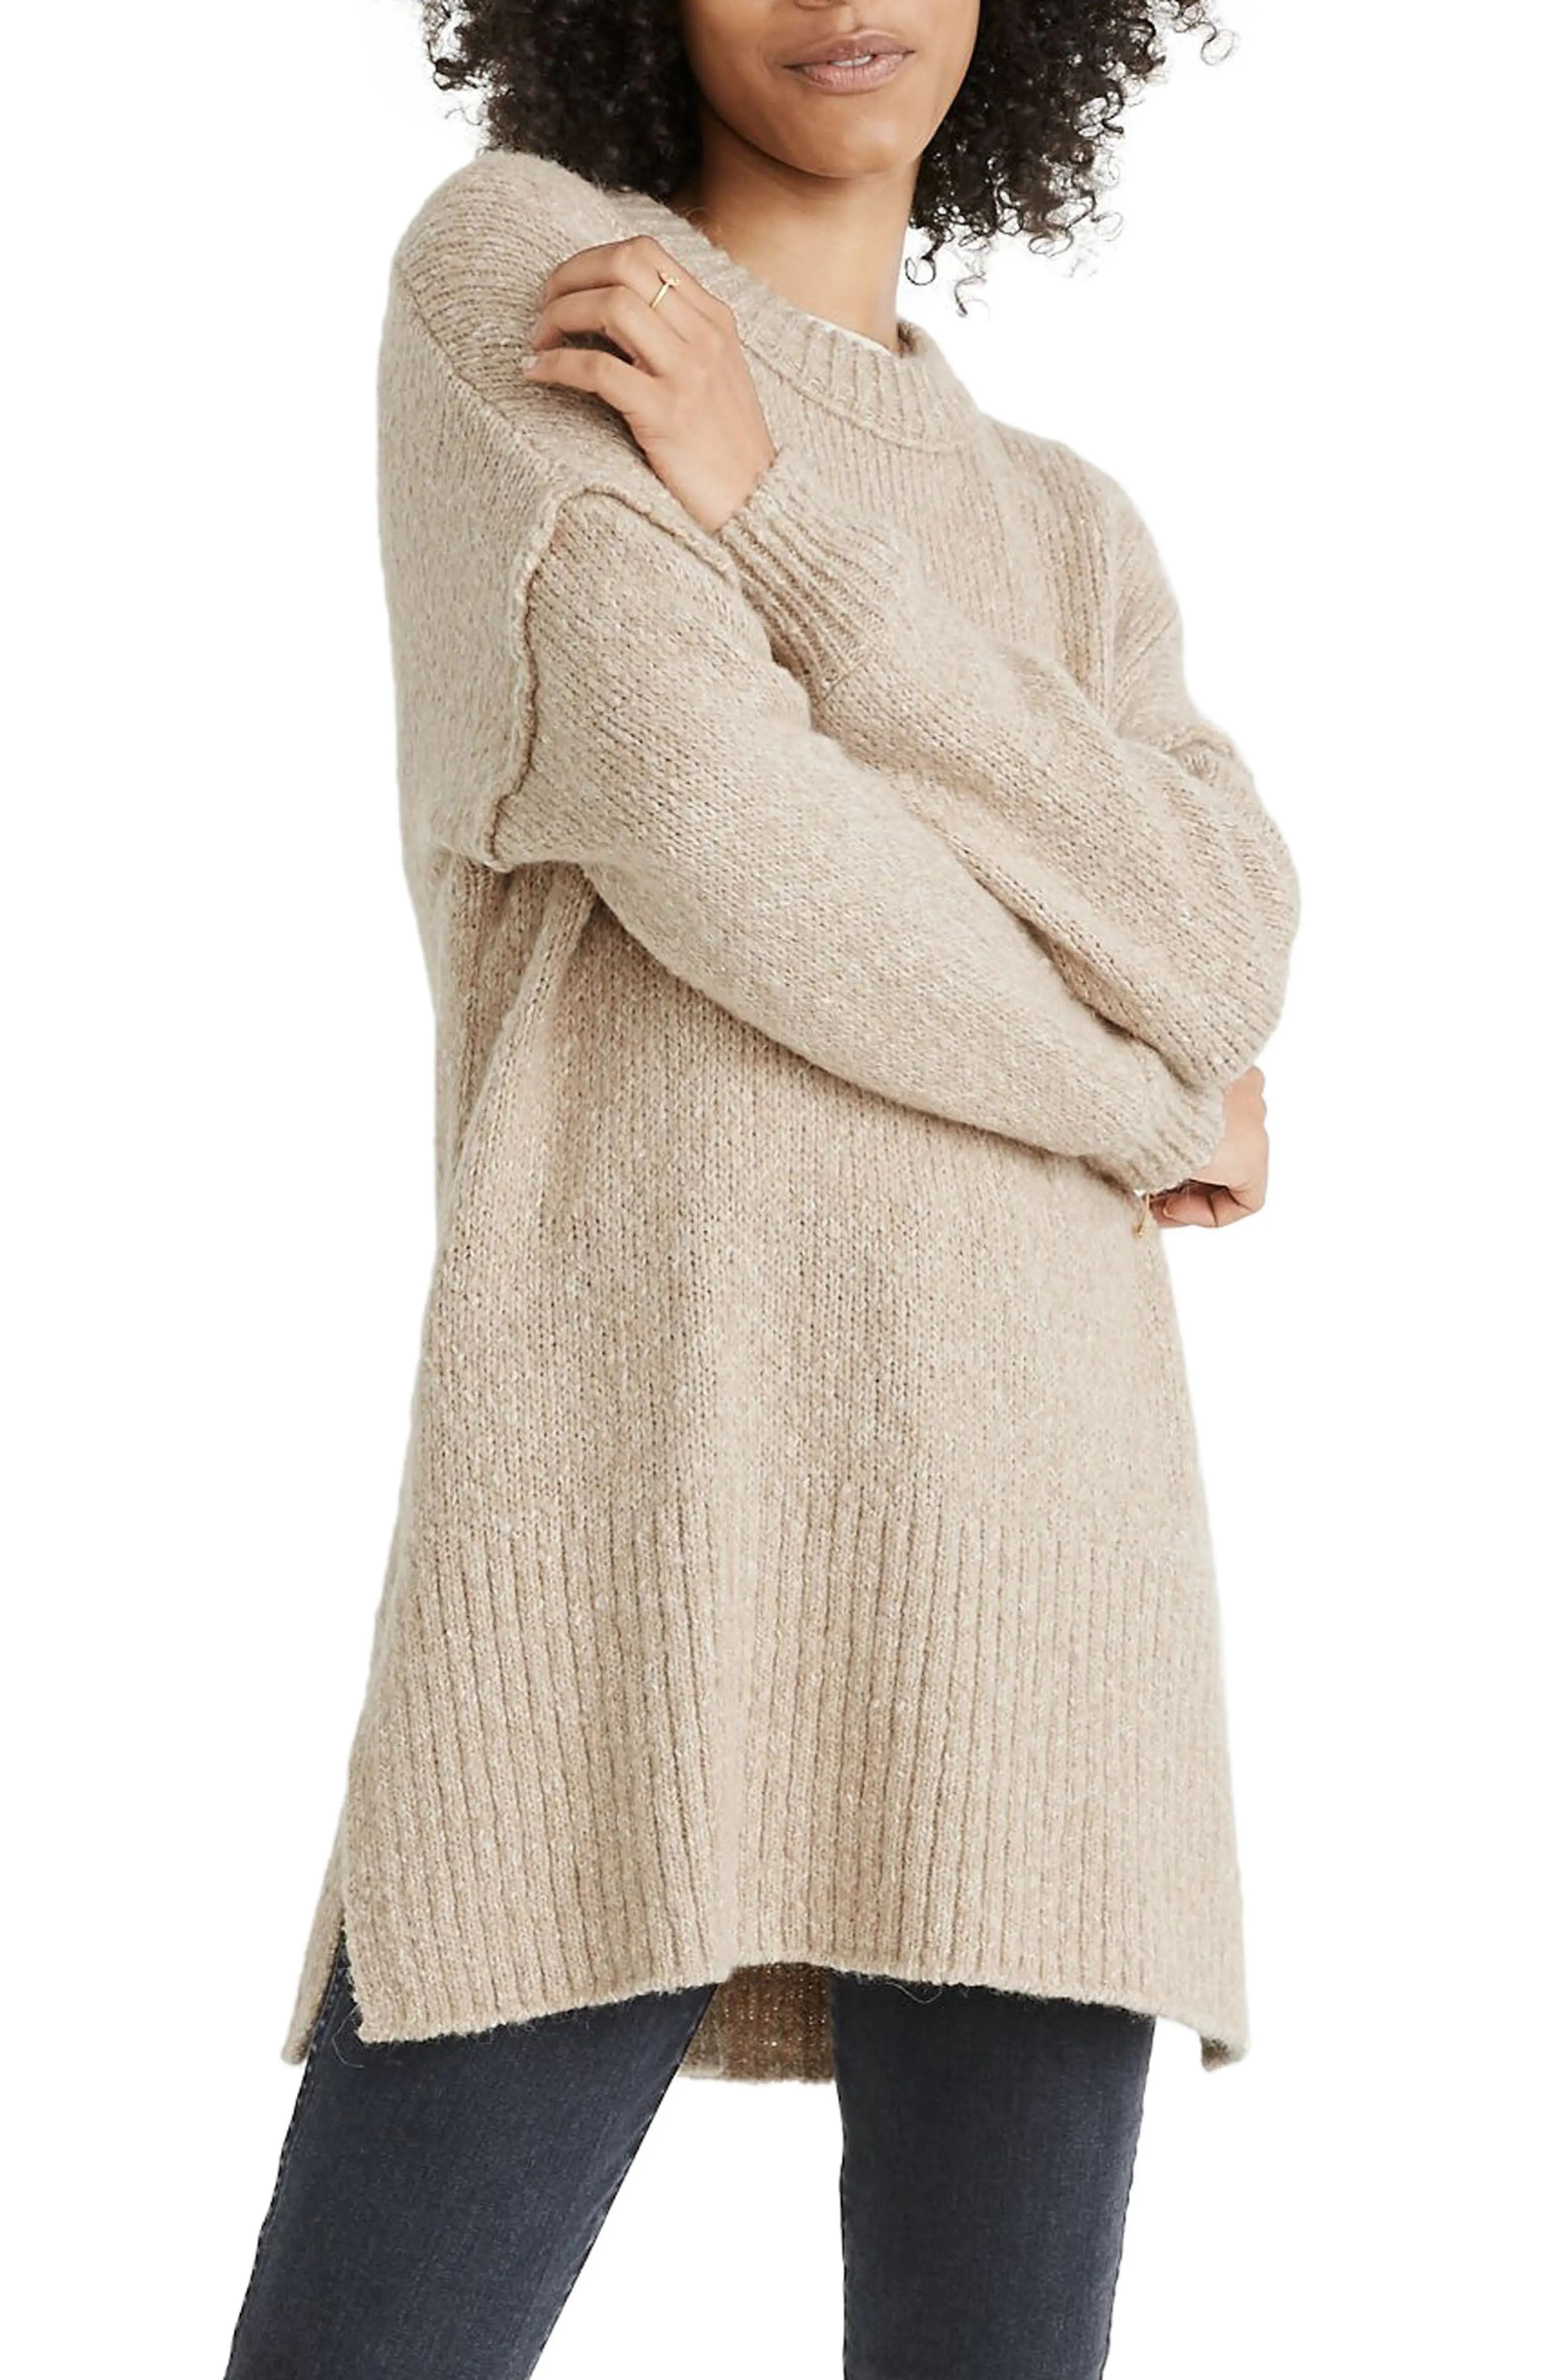 Baxer Sweater Tunic | Nordstrom